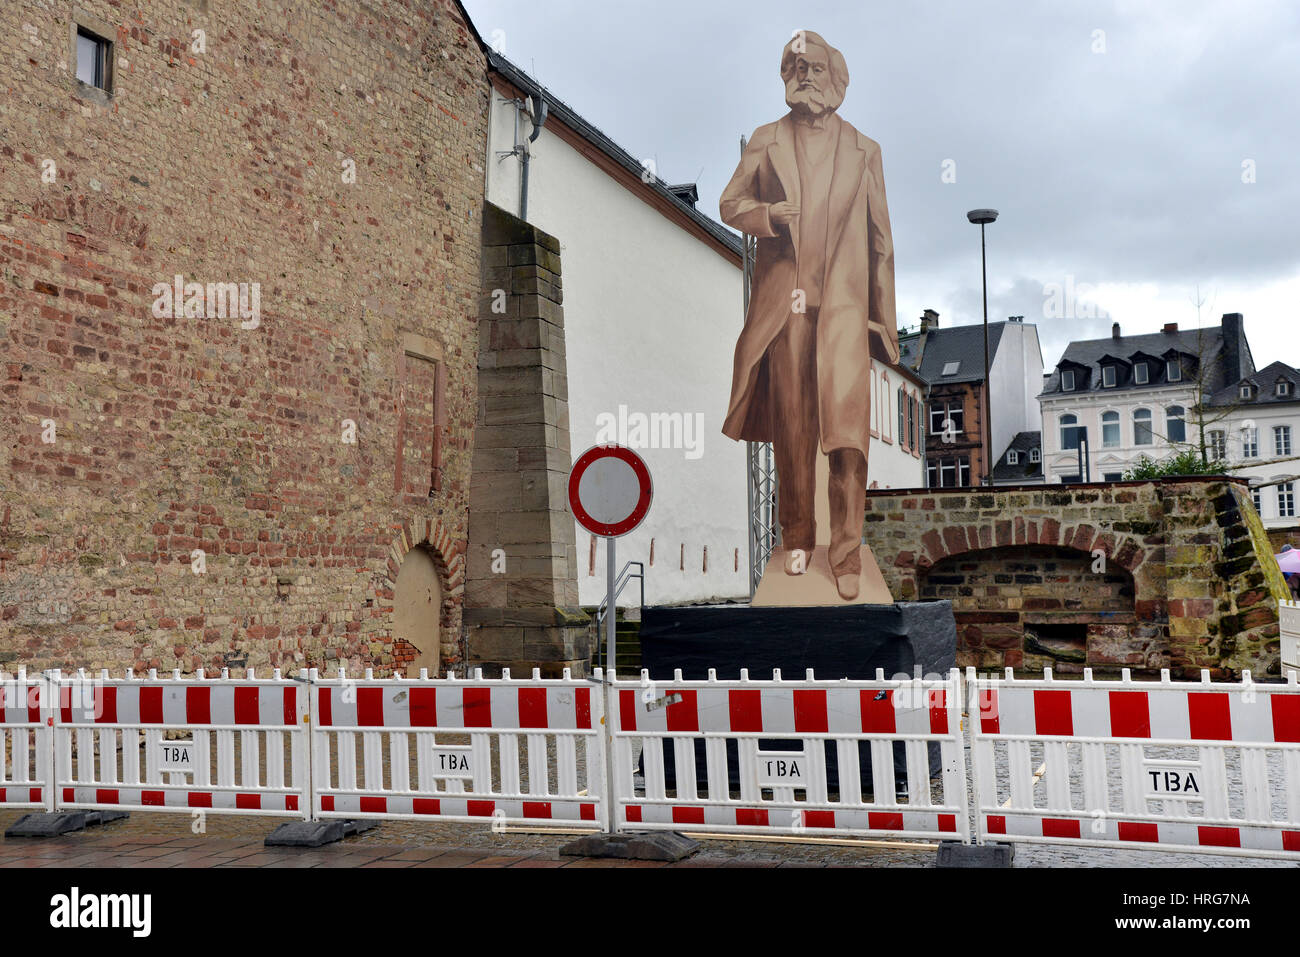 Trier, Germany. 01st Mar, 2017. A wooden cut out of the planned Karl Marx statue, which is to be 6.30 meters high, can be seen in Trier, Germany, 01 March 2017. The People's Republic of China wants to give Trier, the birthplace of Karl Marx, a 'Giant Marx' for his 200th birthday in 2018. Due to its size and the location near the Porta Nigra, it has already triggered criticism so the city wants to give people an impression first with the dummy statue. Photo: Harald Tittel/dpa/Alamy Live News Stock Photo